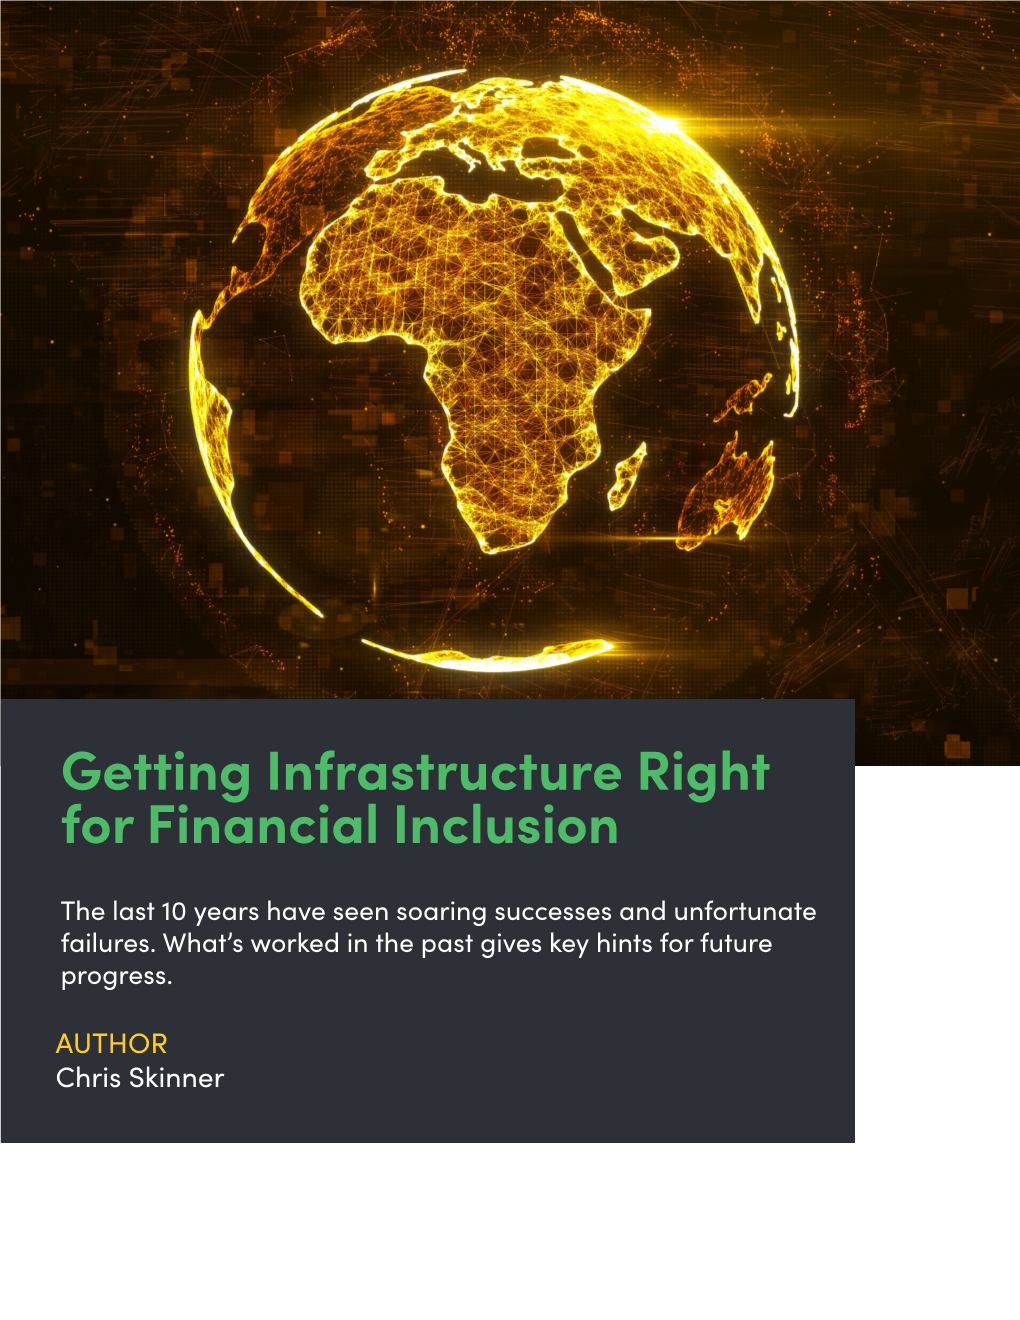 Getting Infrastructure Right for Financial Inclusion